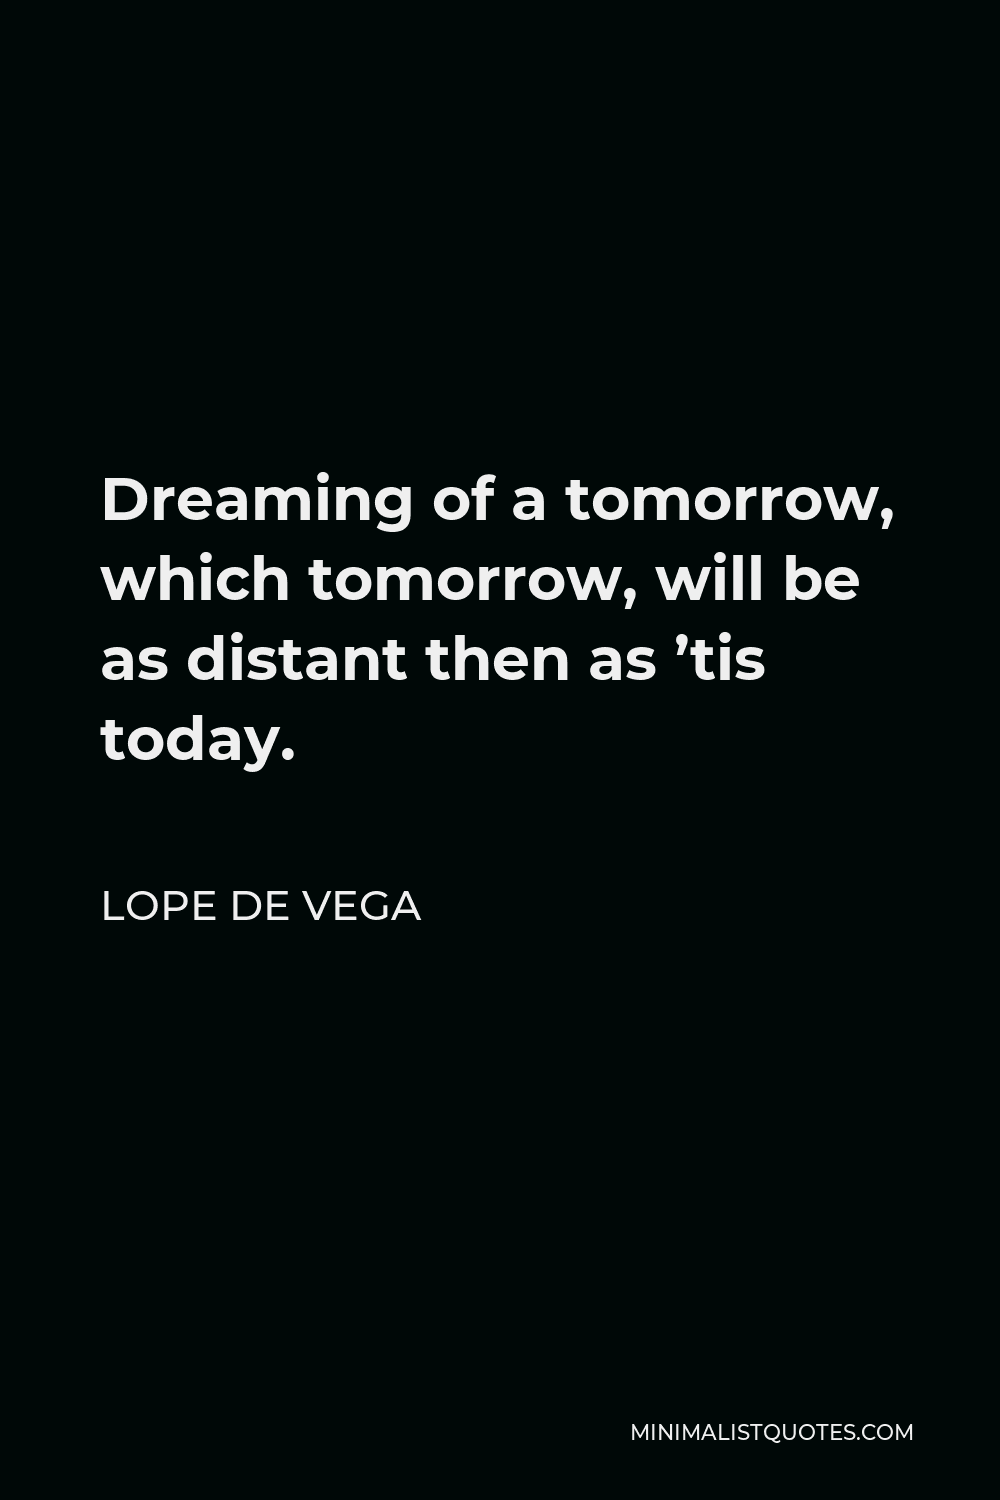 Lope de Vega Quote - Dreaming of a tomorrow, which tomorrow, will be as distant then as ’tis today.